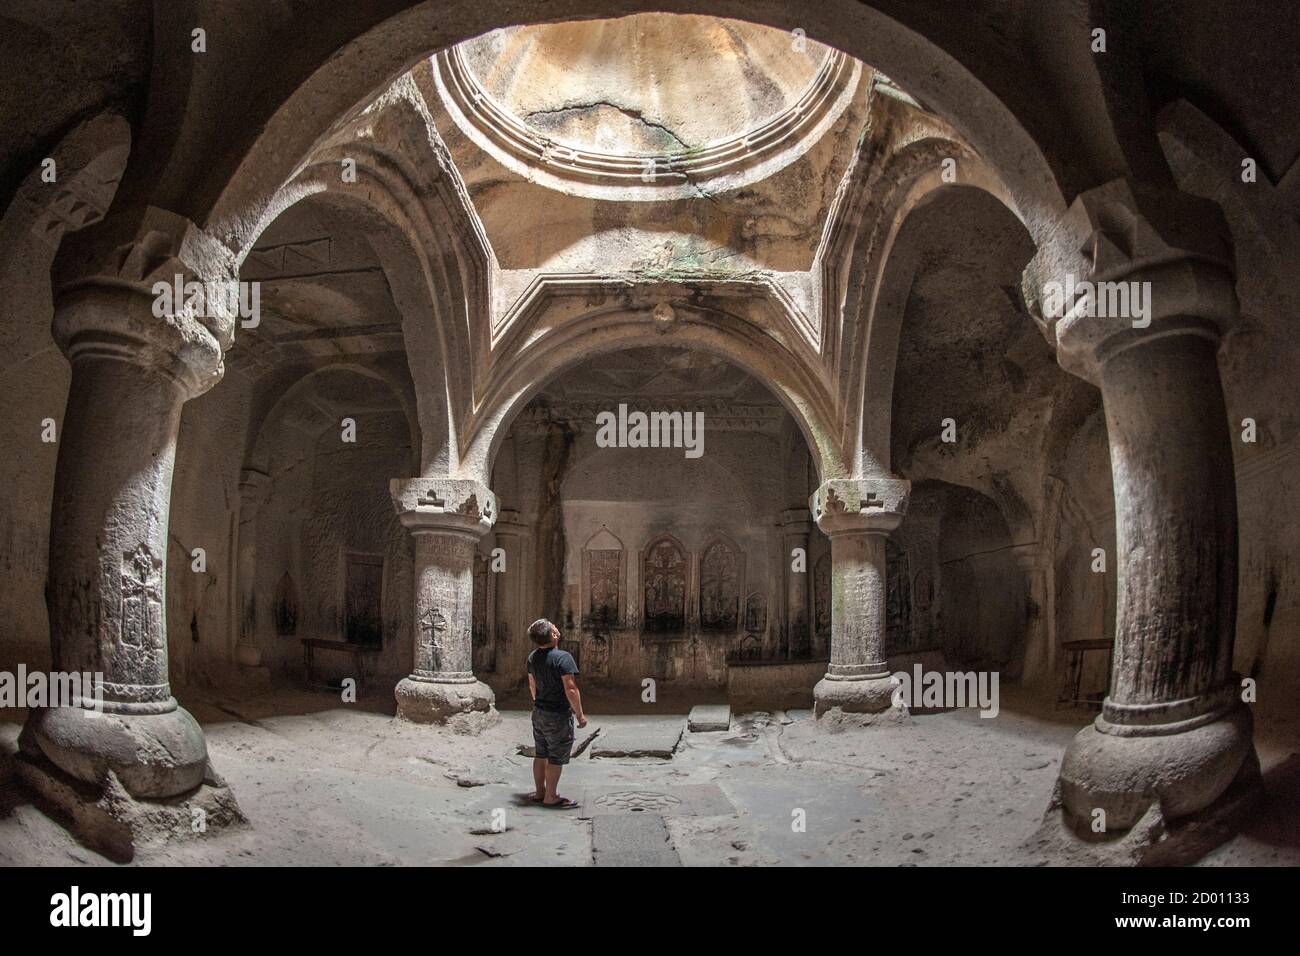 A tourist looking at the roof of the gavit of the Geghard monastery in Armenia. Stock Photo